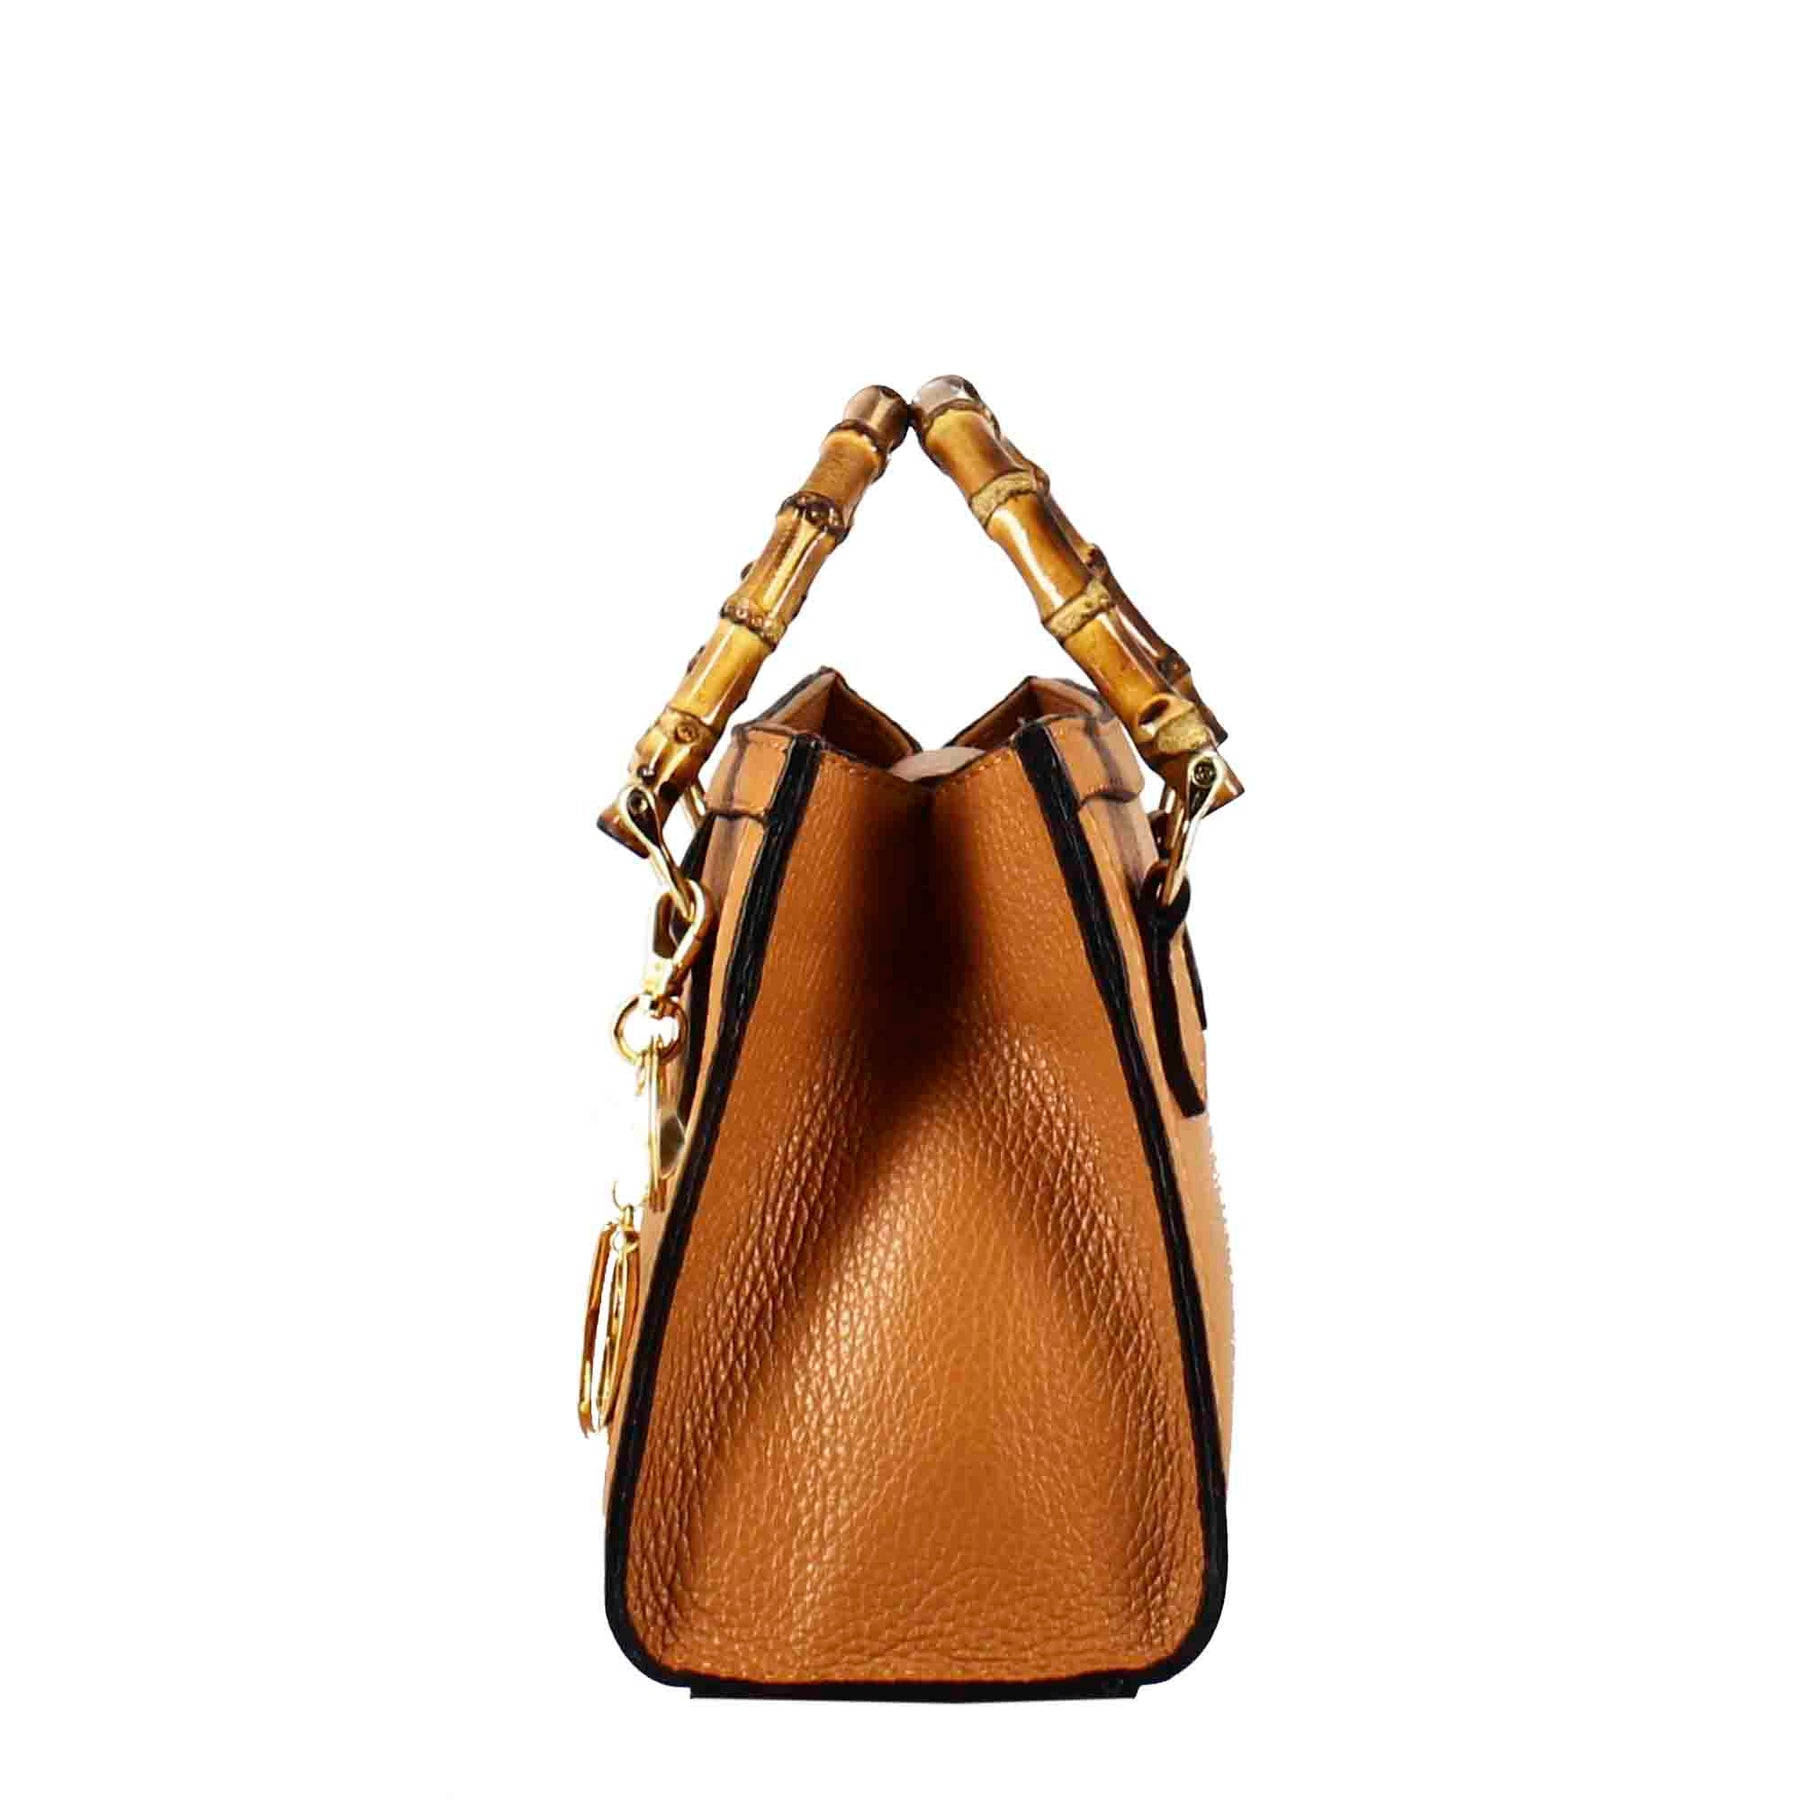 Women's brown leather Bamboo bag with wooden handles and shoulder strap